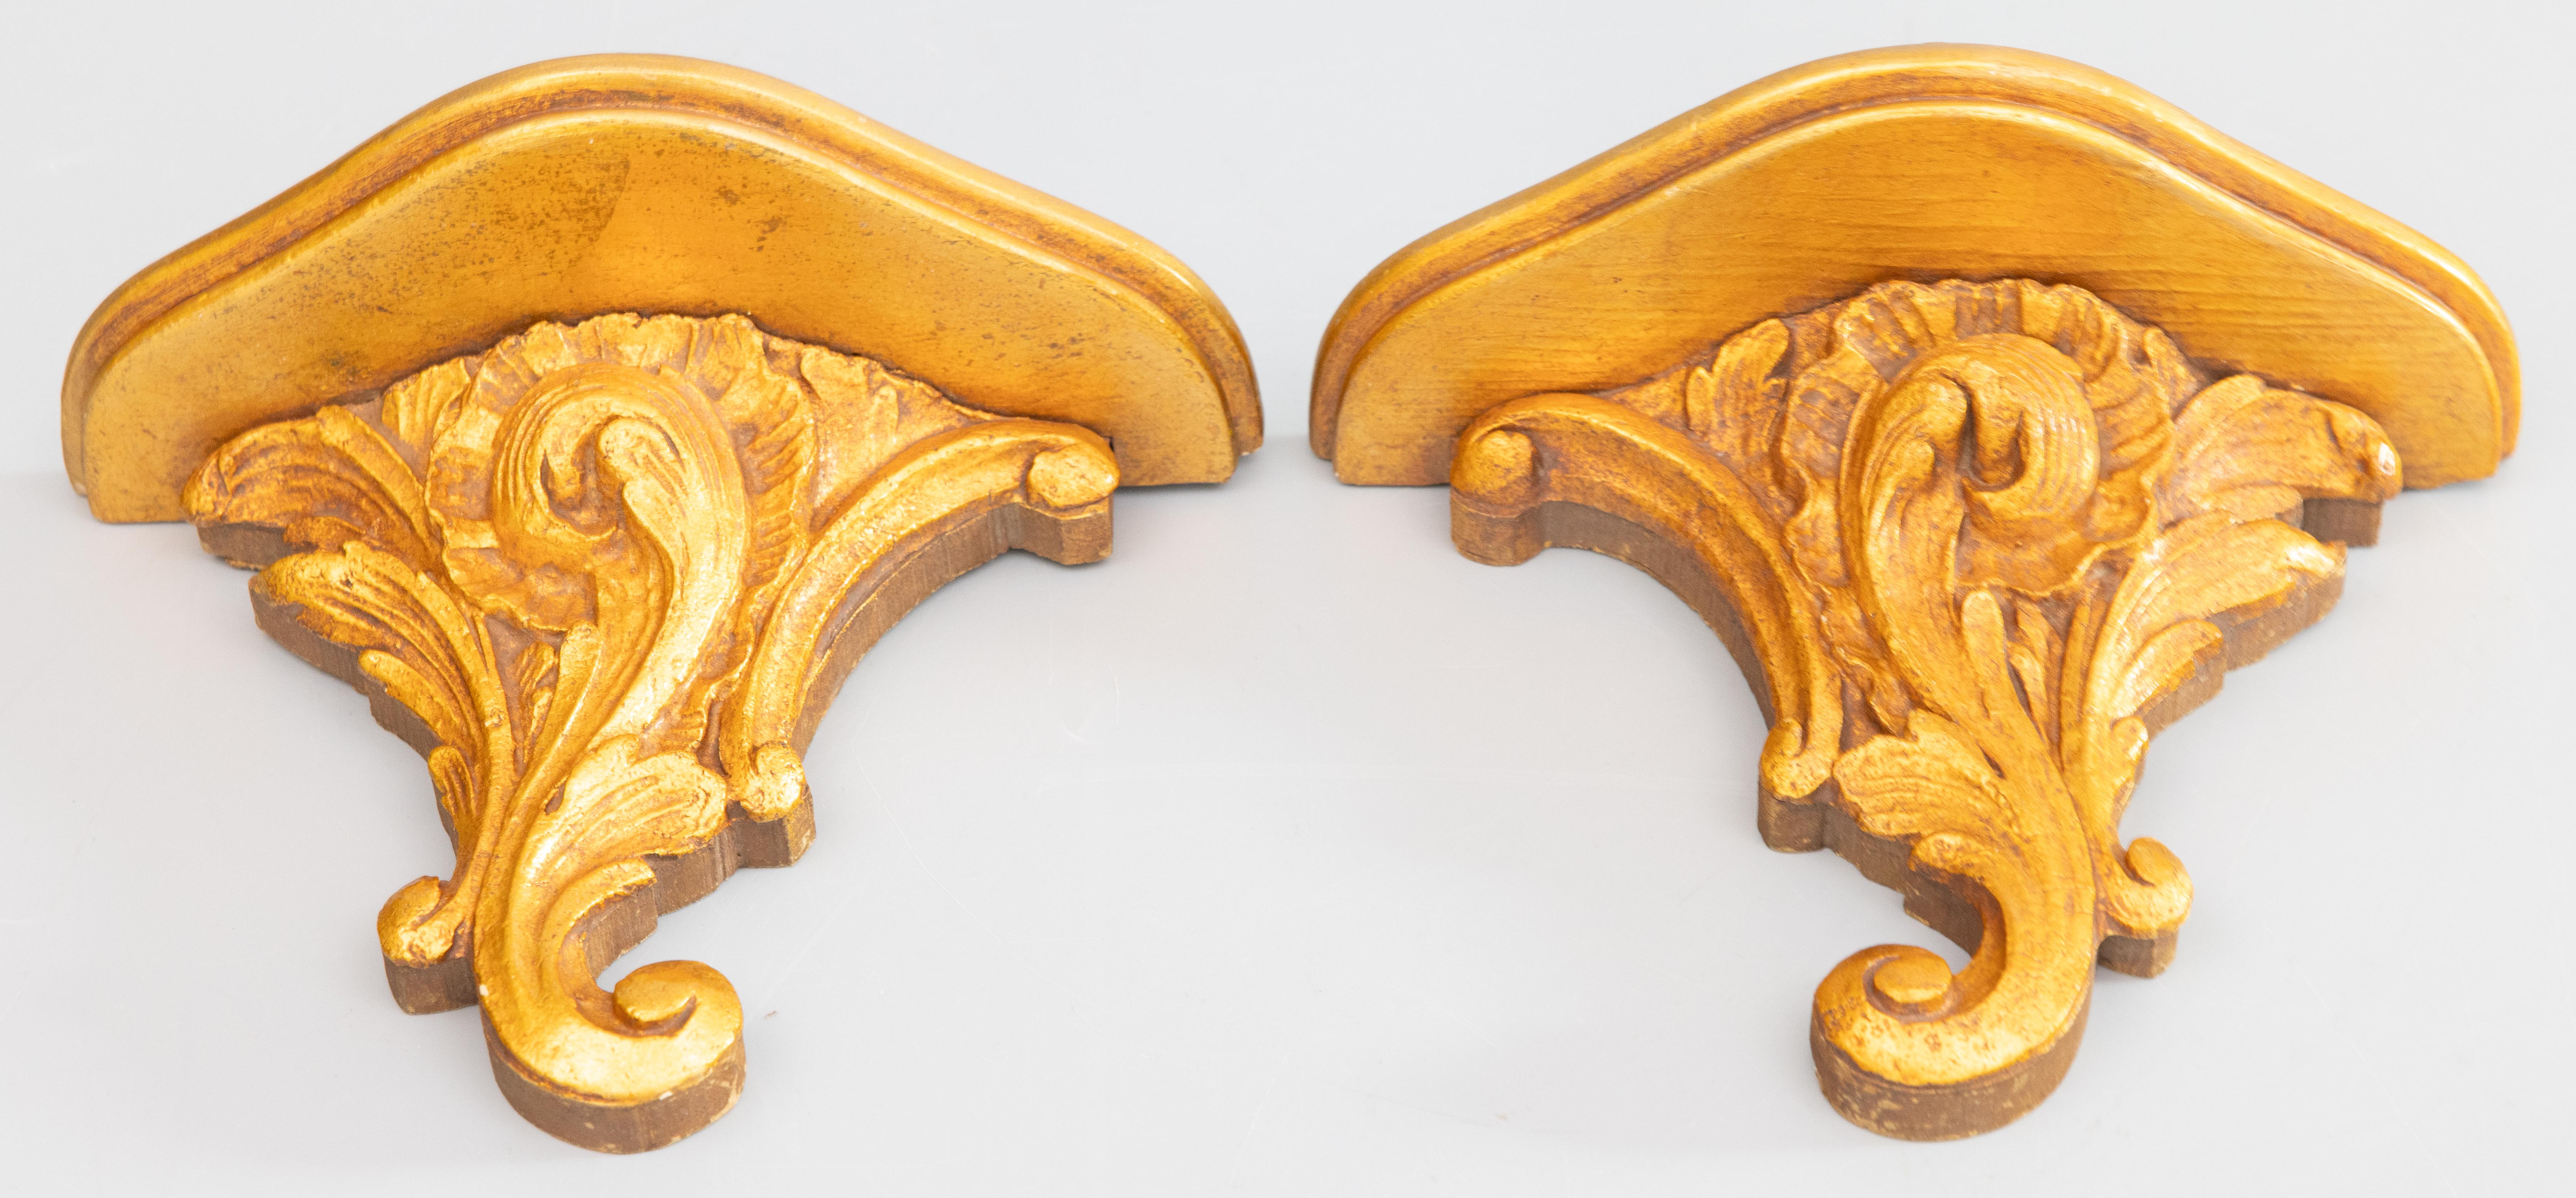 Pair of Mid-20th Century Italian Giltwood & Gesso Wall Brackets Shelves For Sale 1